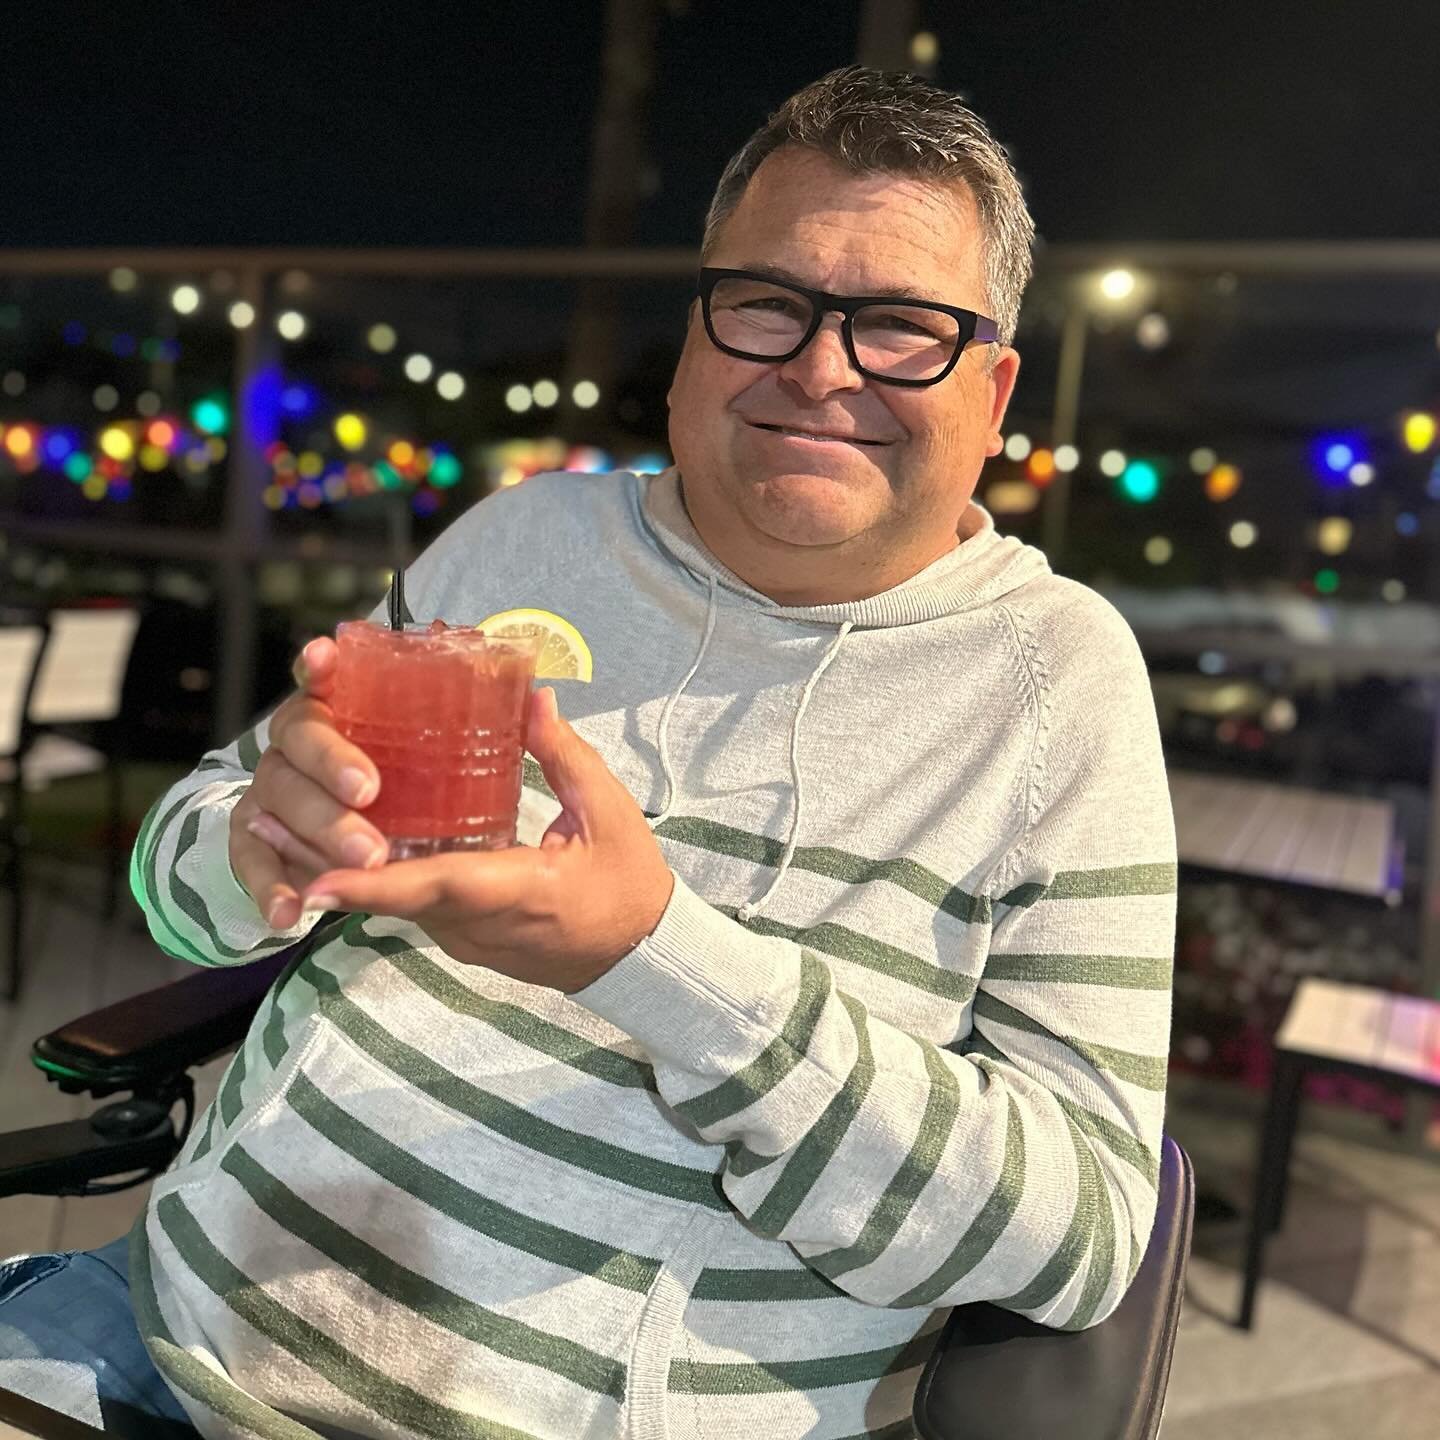 Cheers to 51!

I had a great day yesterday, celebrating my birthday with my family. We had dinner at @calicofishhouse in Huntington Beach and it was delicious. I&rsquo;ve been craving a crab cake and Calico&rsquo;s definitely hit the spot. 

Tomorrow